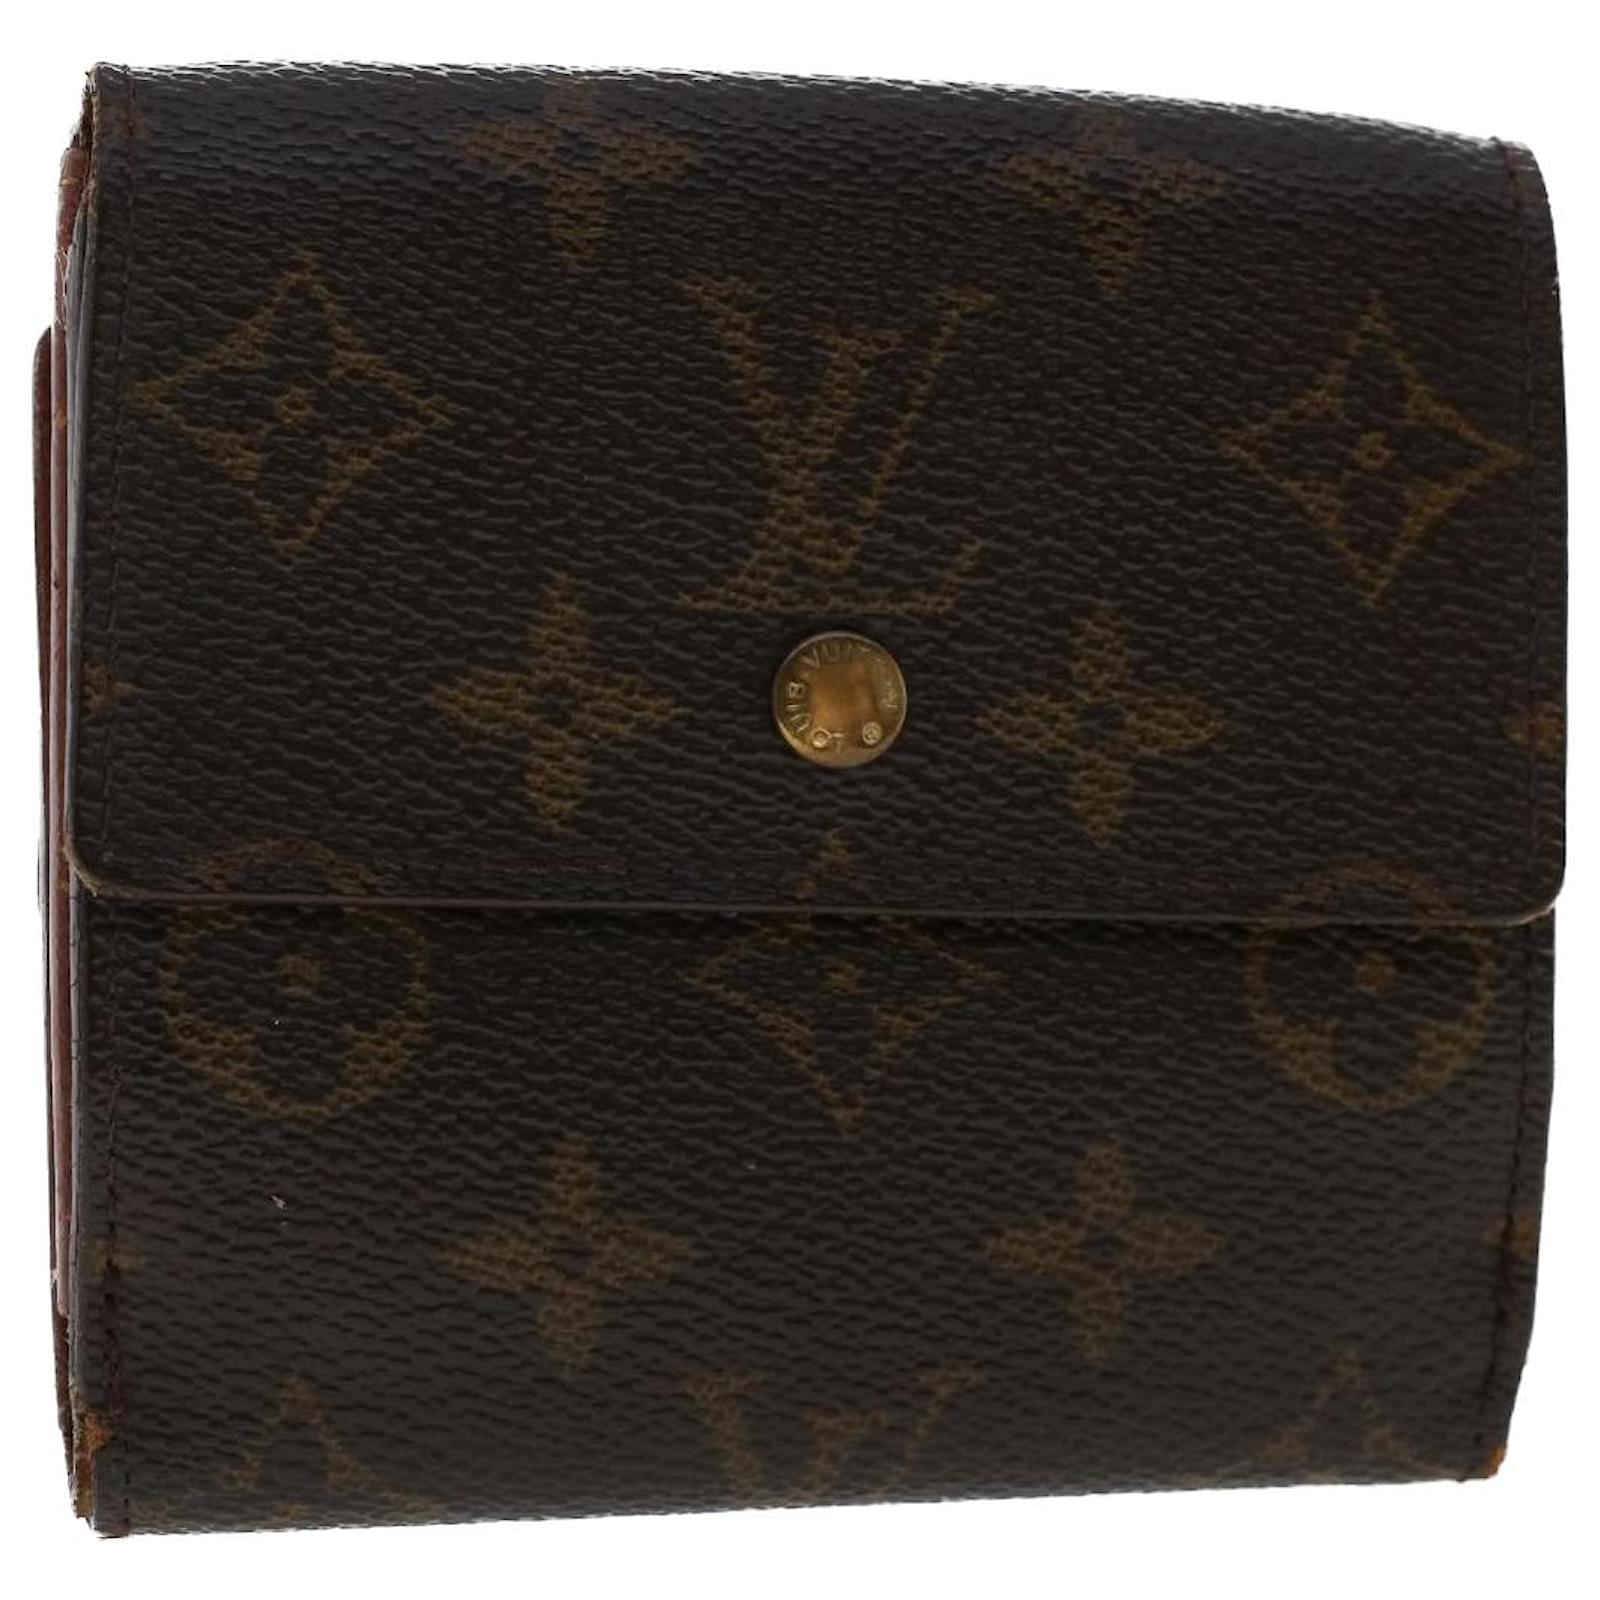 Buy Online Louis Vuitton-MONO ELISE WALLET-M61654 with Attractive